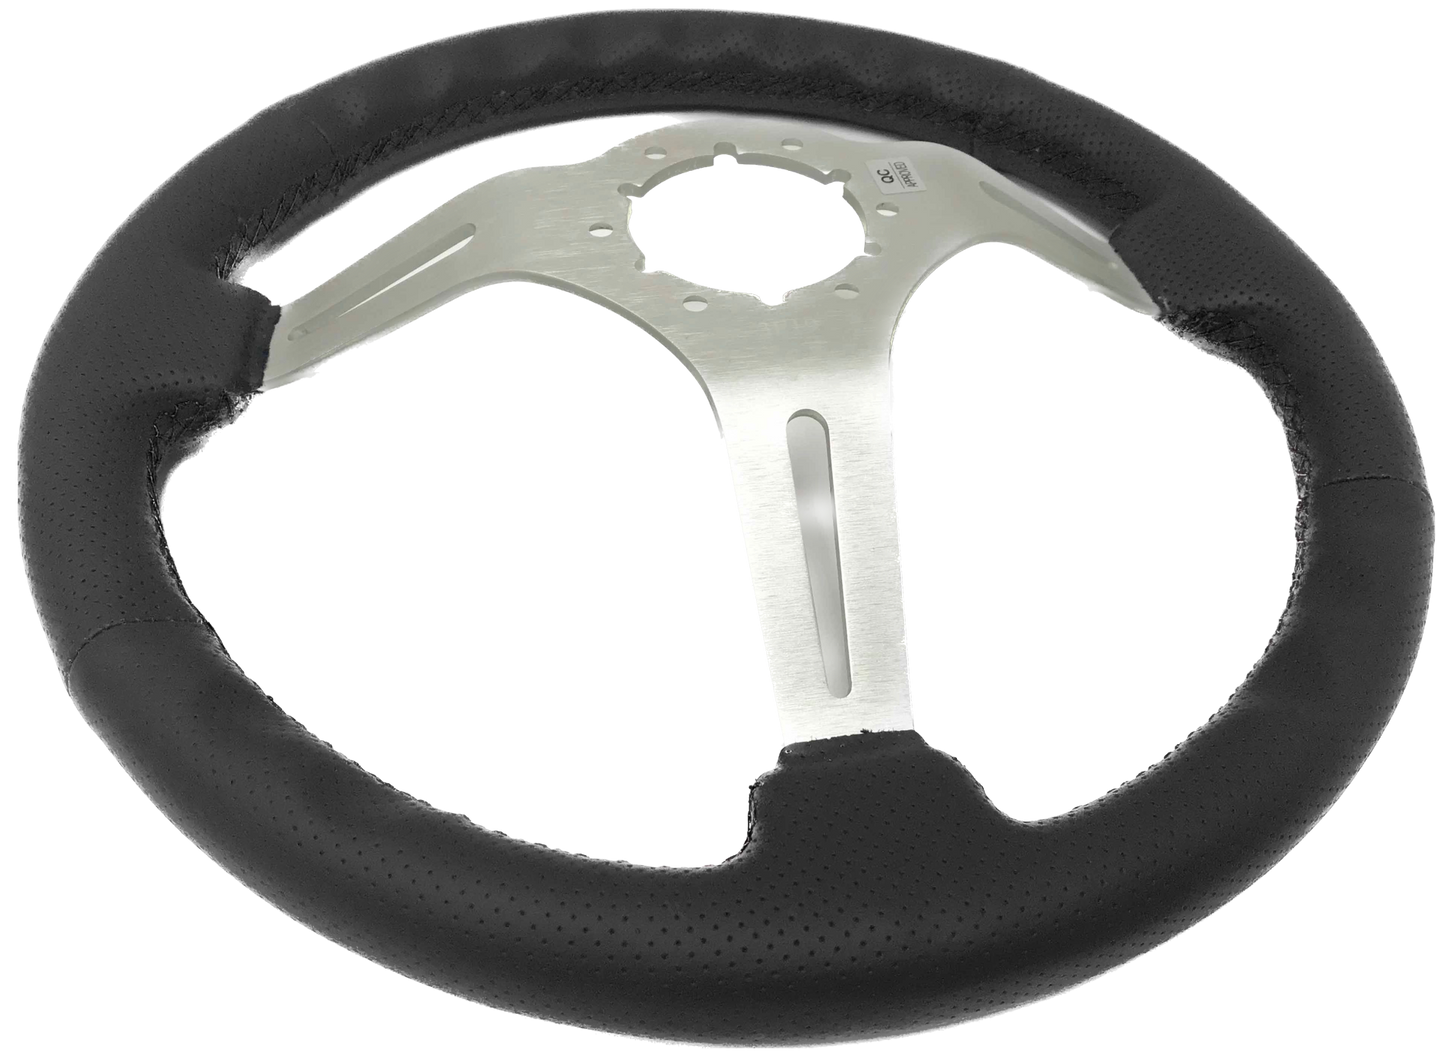 1988-97 Nissan Pickup Truck Steering Wheel Kit | Perforated Leather | ST3587BLK-BLK